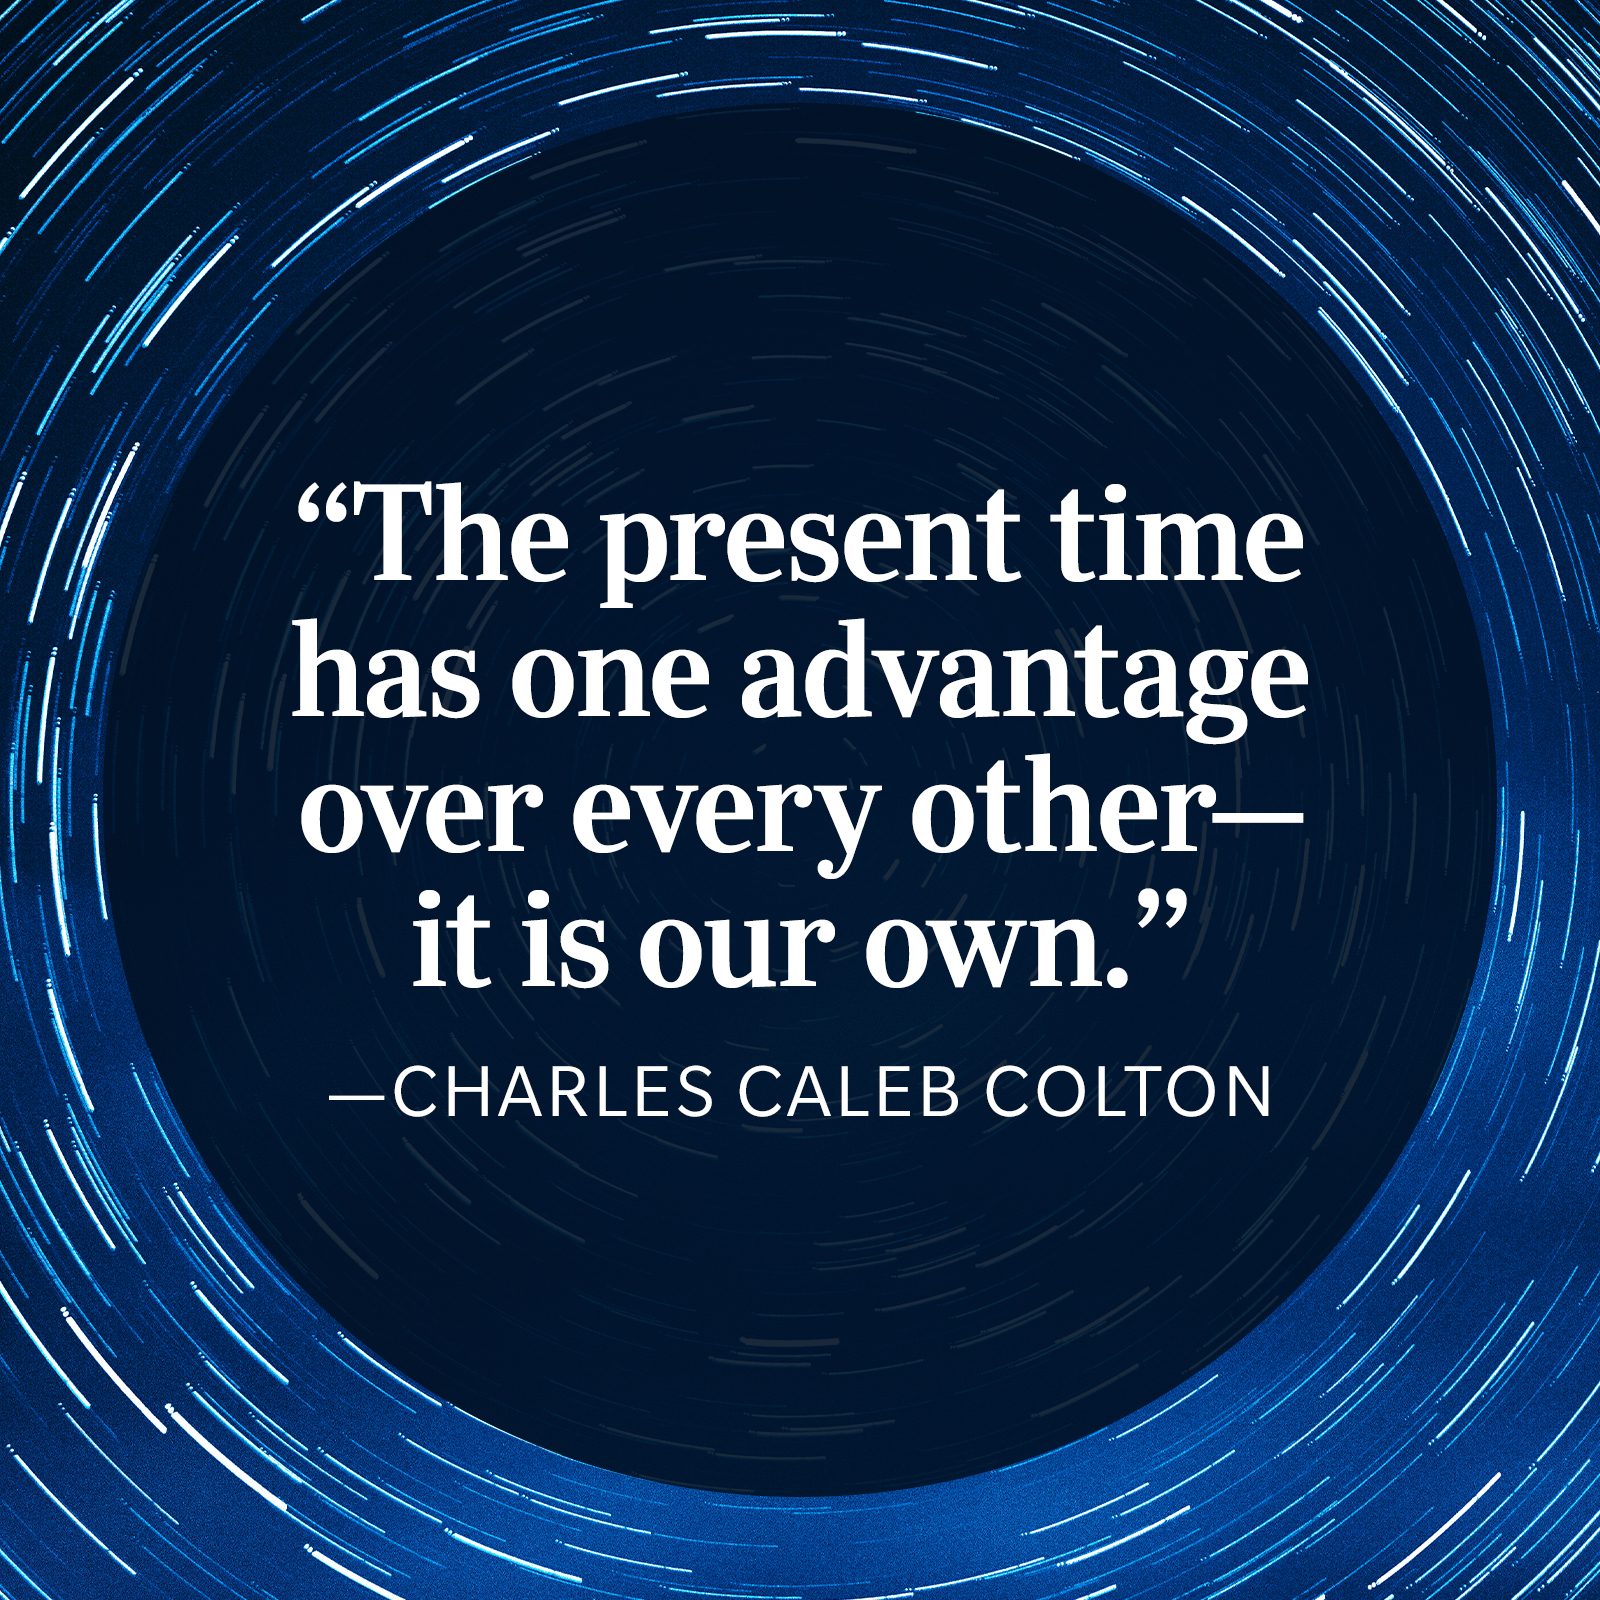 35 Inspirational Quotes On Living In The Present Moment